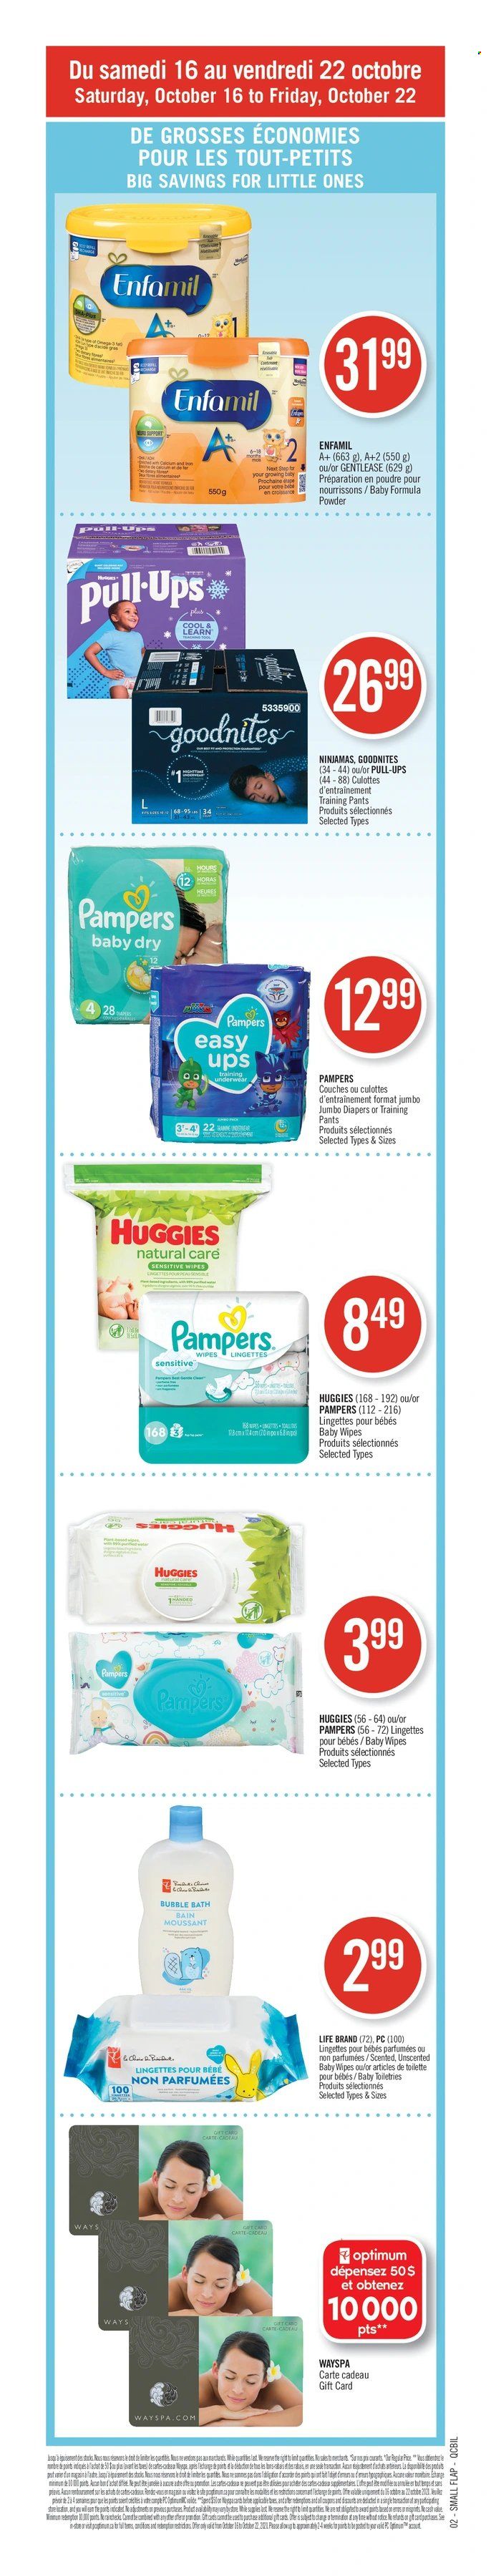 thumbnail - Pharmaprix Flyer - October 16, 2021 - October 22, 2021 - Sales products - Enfamil, wipes, pants, baby wipes, nappies, baby pants, bubble bath, Huggies, Pampers. Page 16.